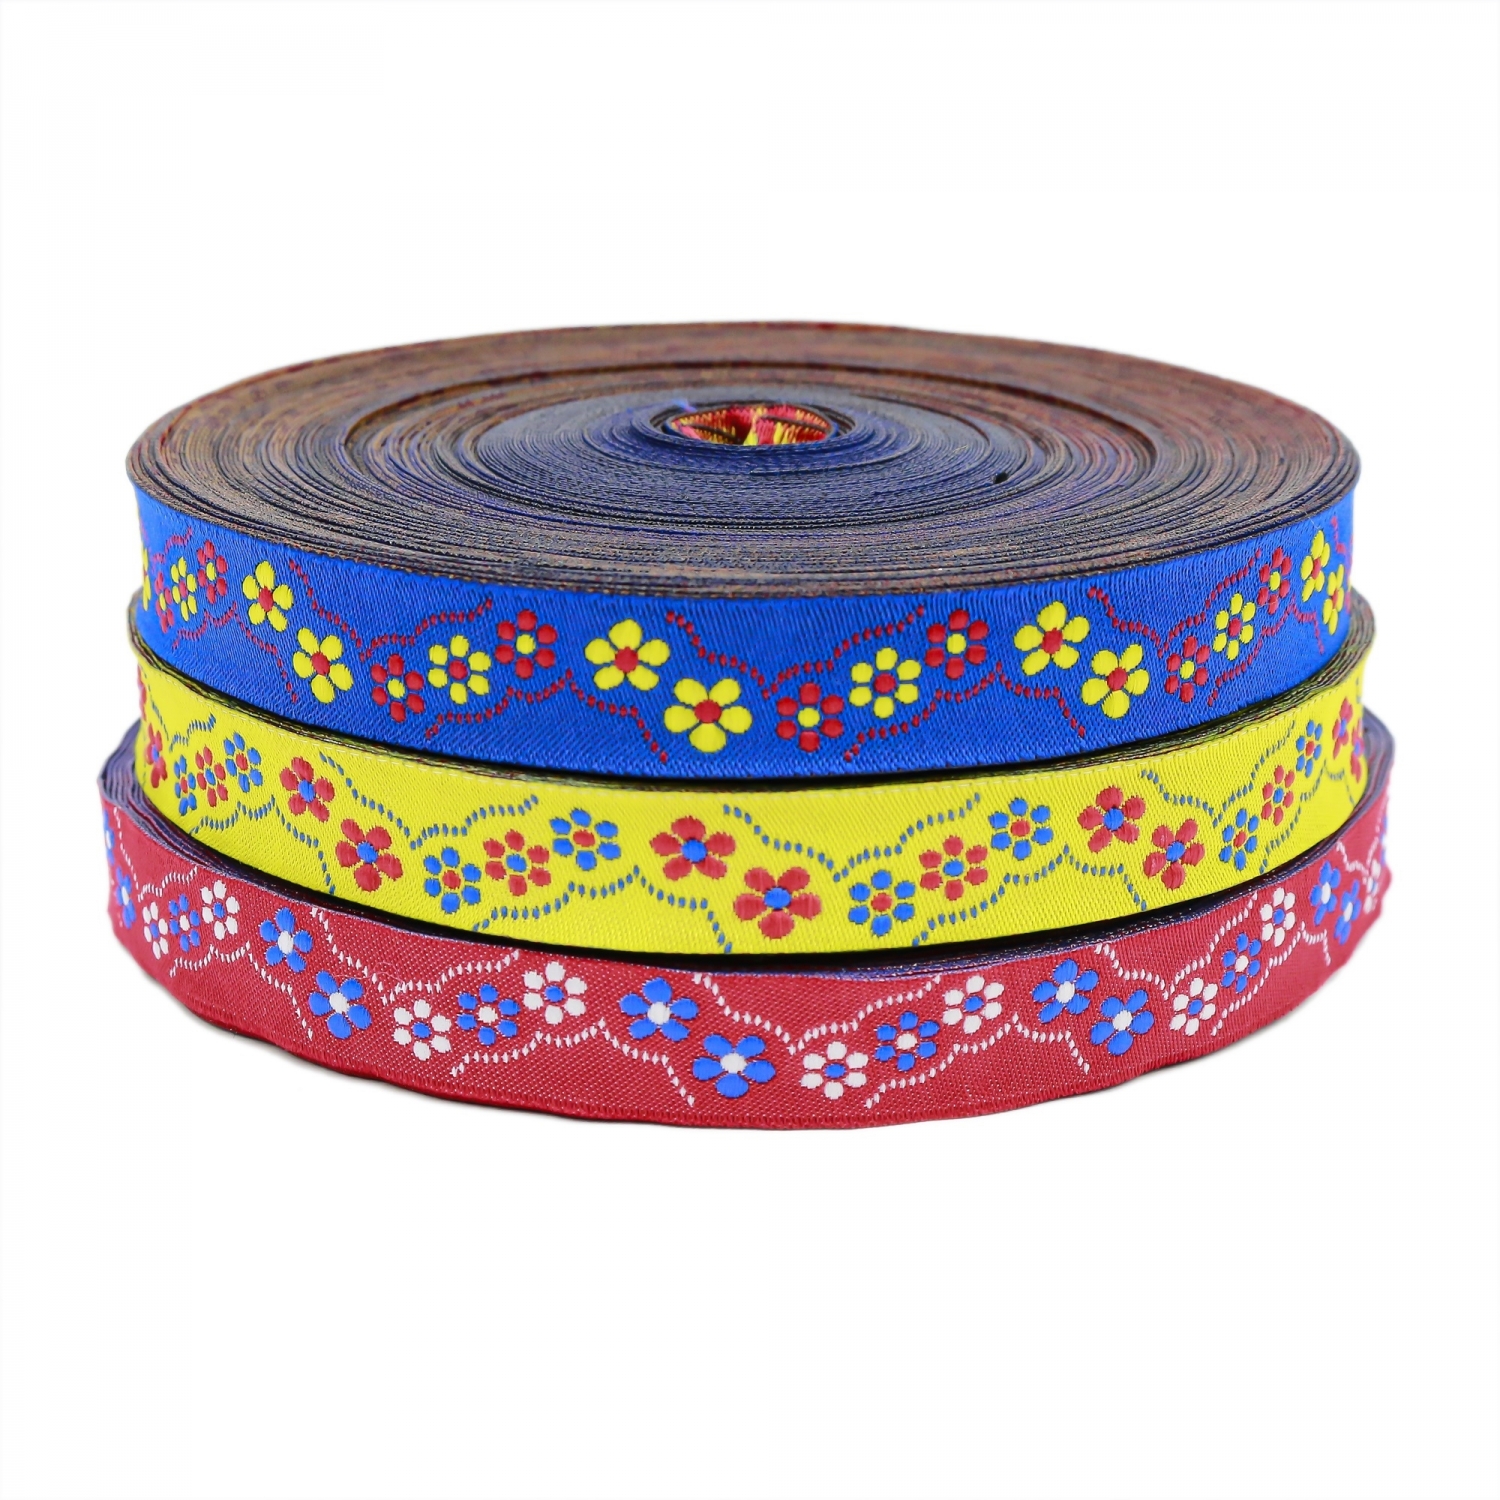 Decorative Tape, width 16 mm (25 meters/roll)Code: ALEXIA